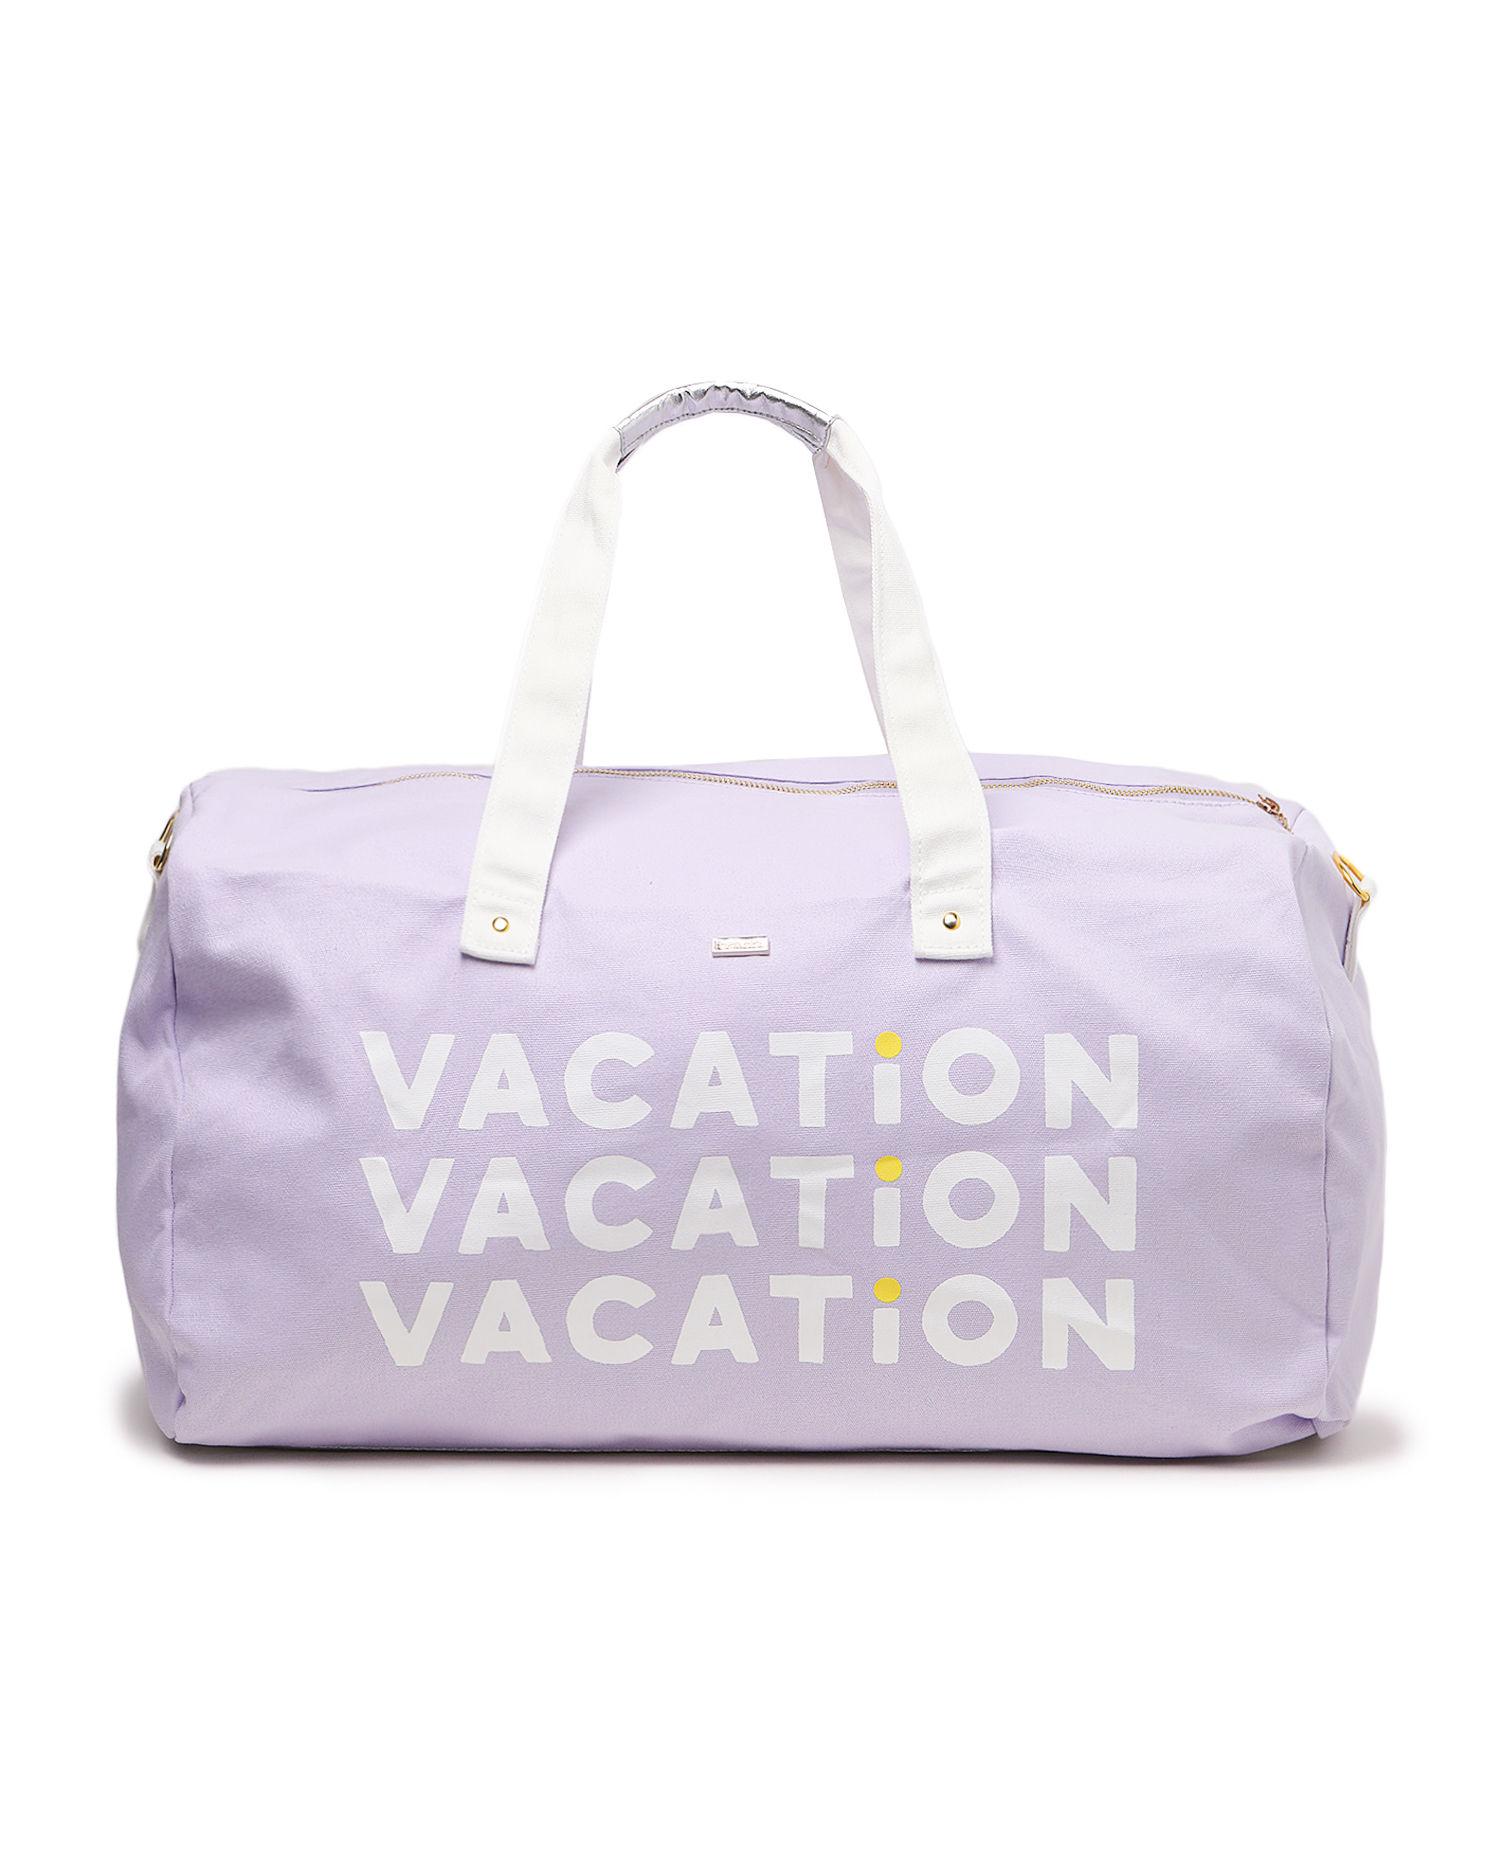 Vacation travel bag by BAN.DO